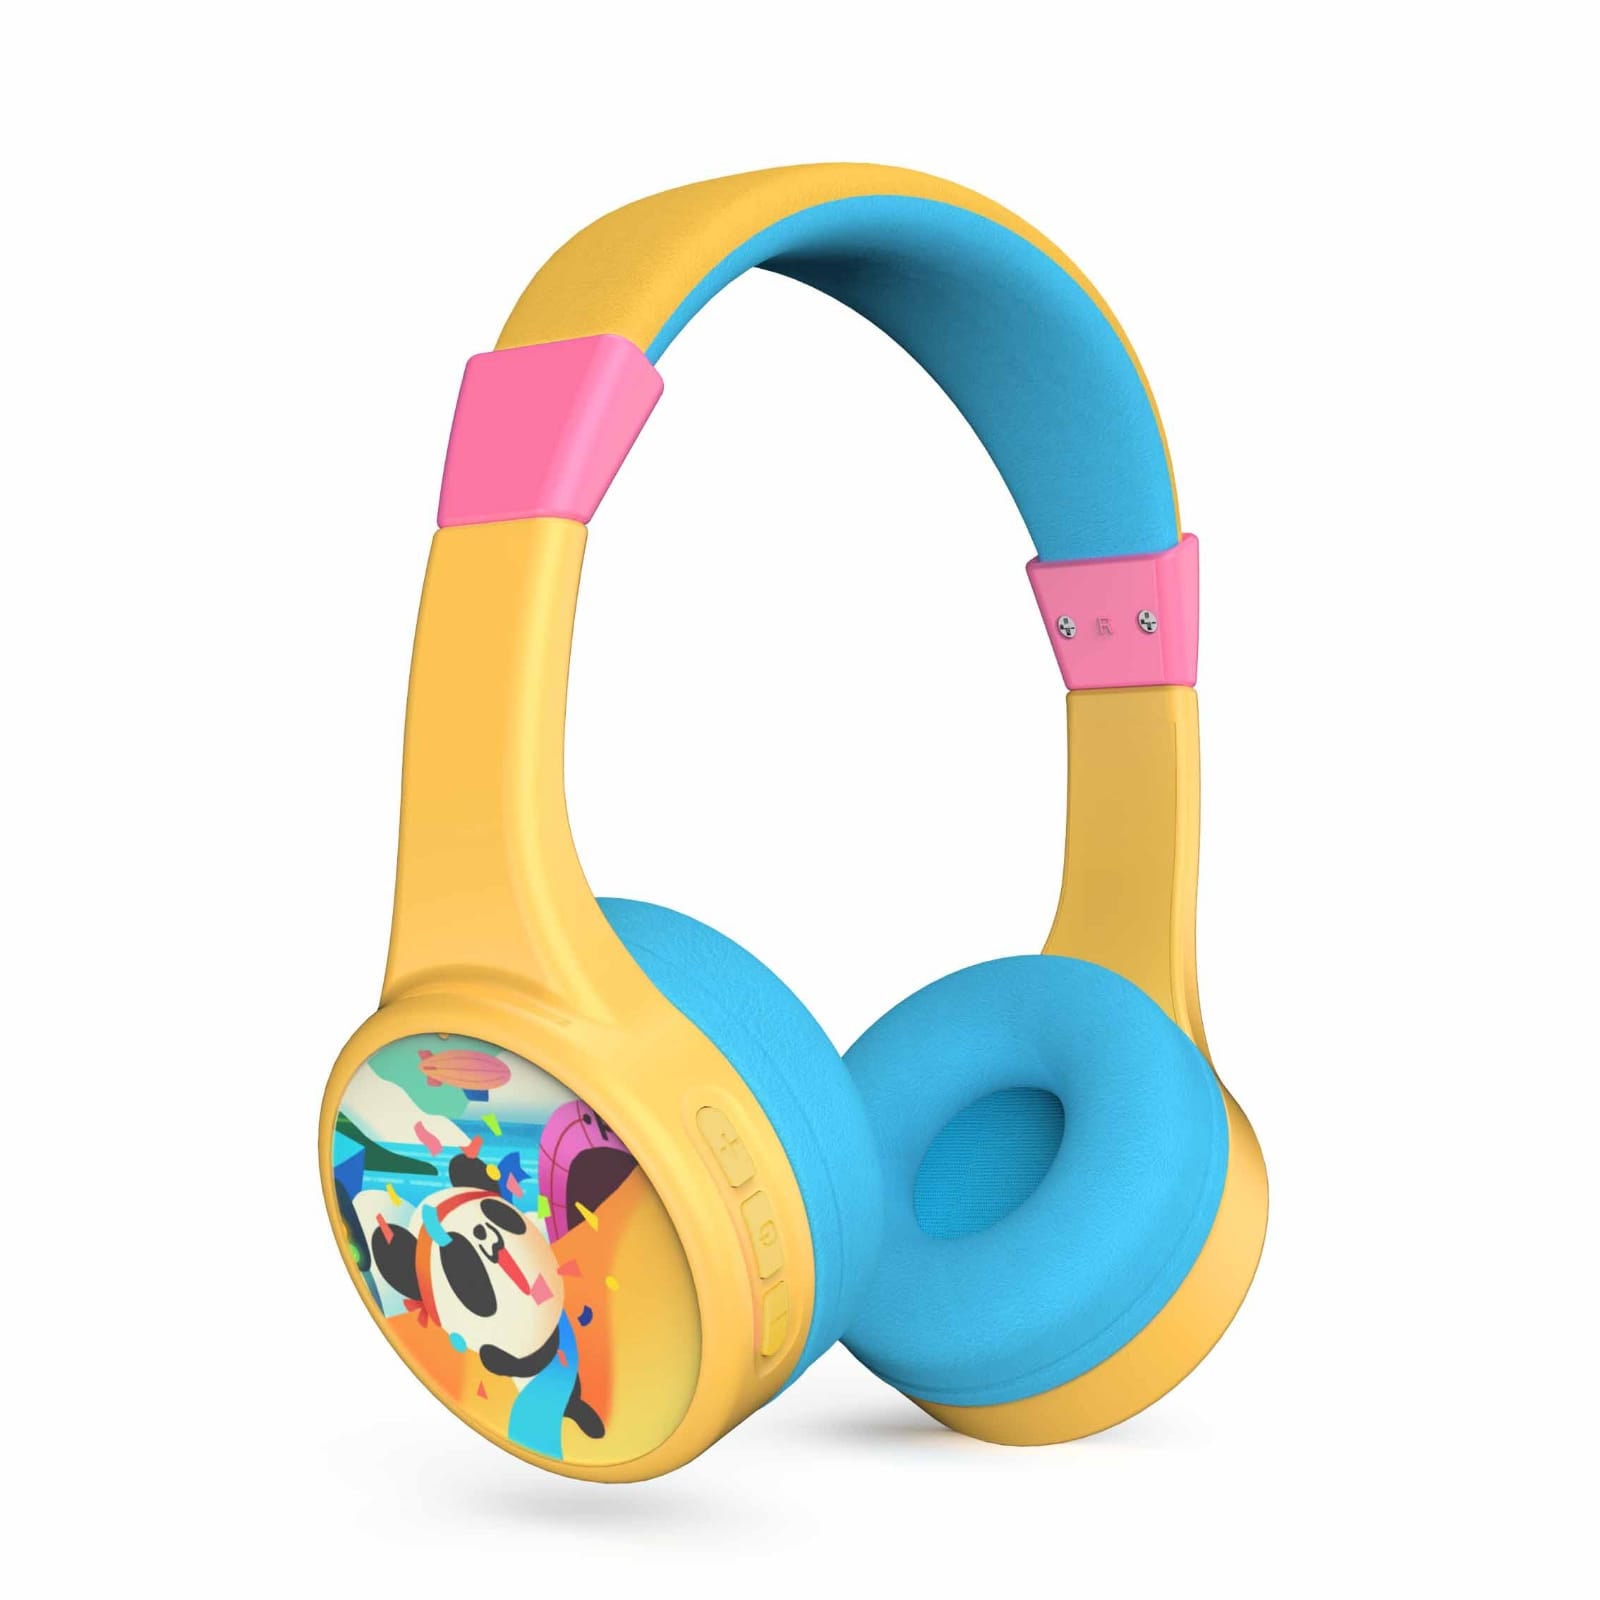 e-PitchPerfect (e-PP) for Kids Bluetooth V5.0 Wireless Headphones, Over Ear Comfortable Earpads, 30 Hours Playtime Designed and Engineered in the USA. Sold 5,000+ worldwide